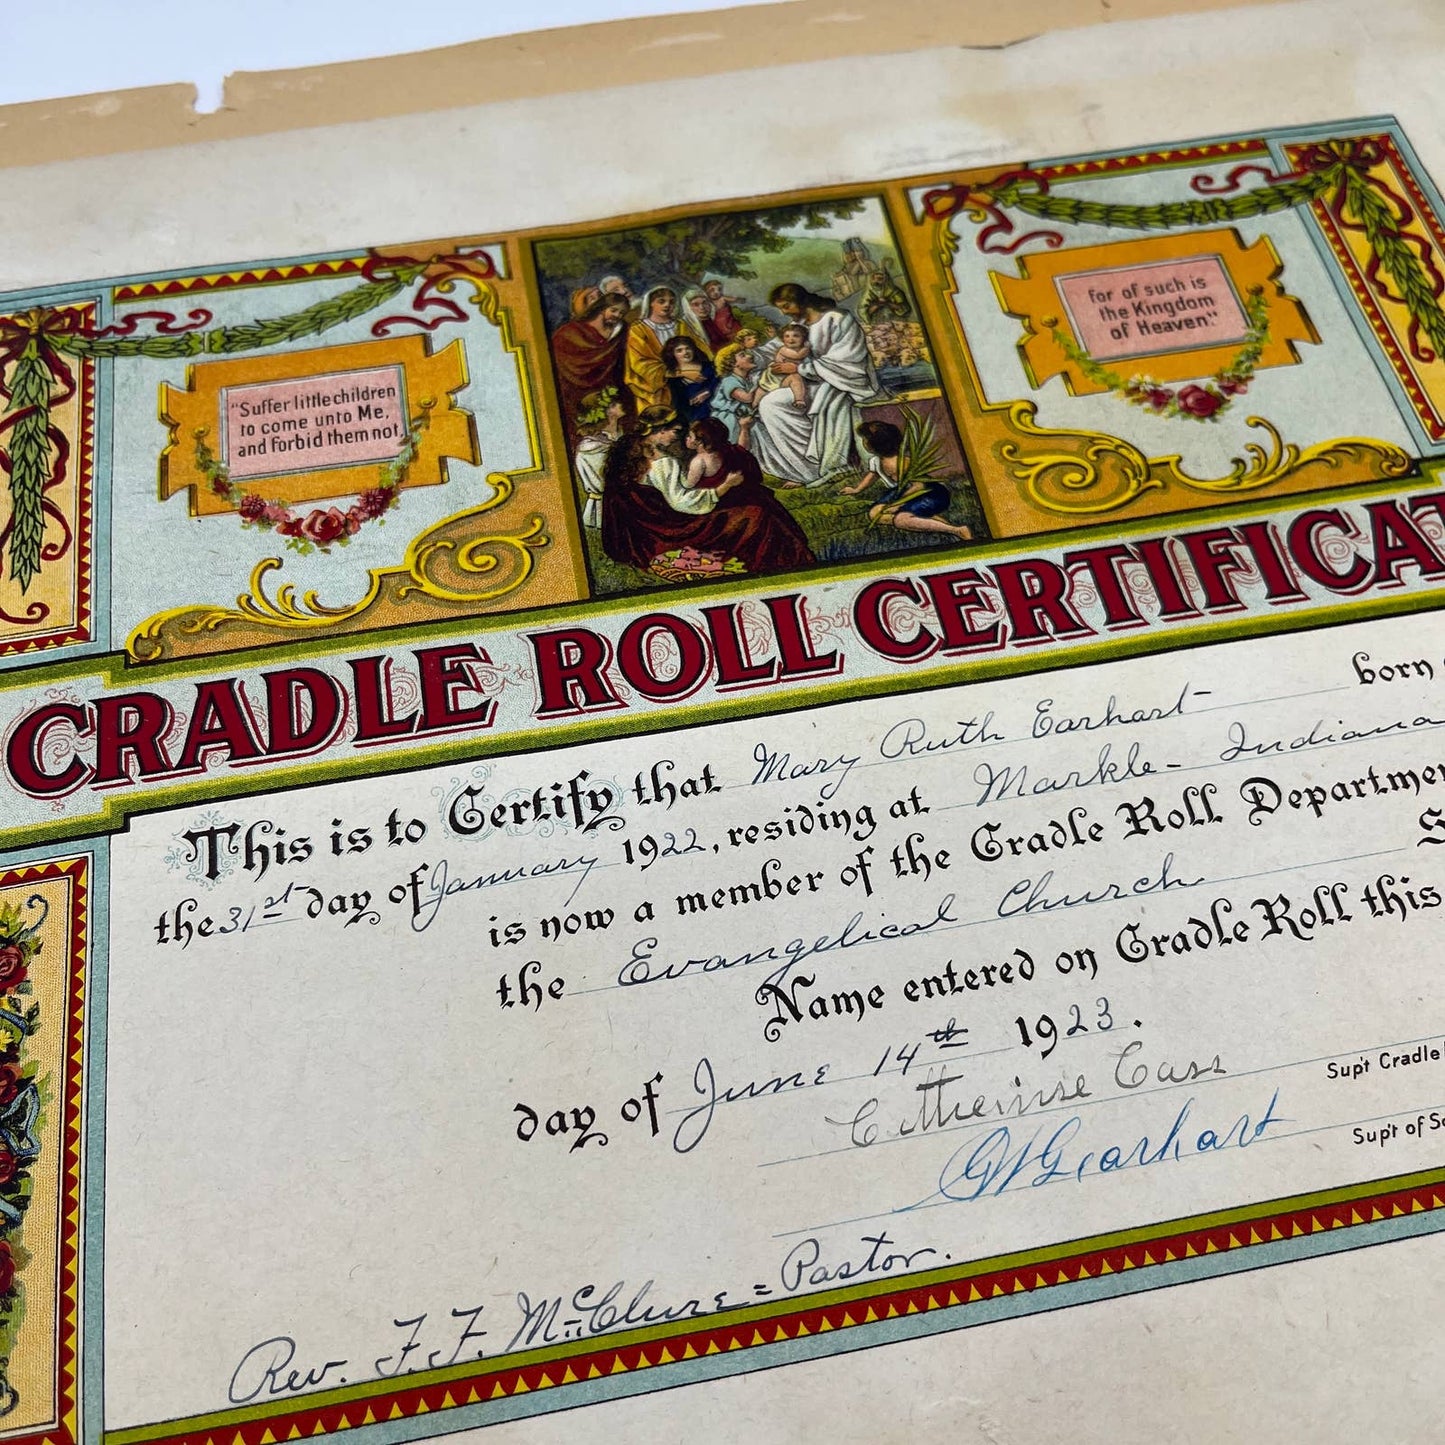 1923 Cradle Roll Certificate Mary Ruth Earhart Markle IN Rev F.F. McClure FL4